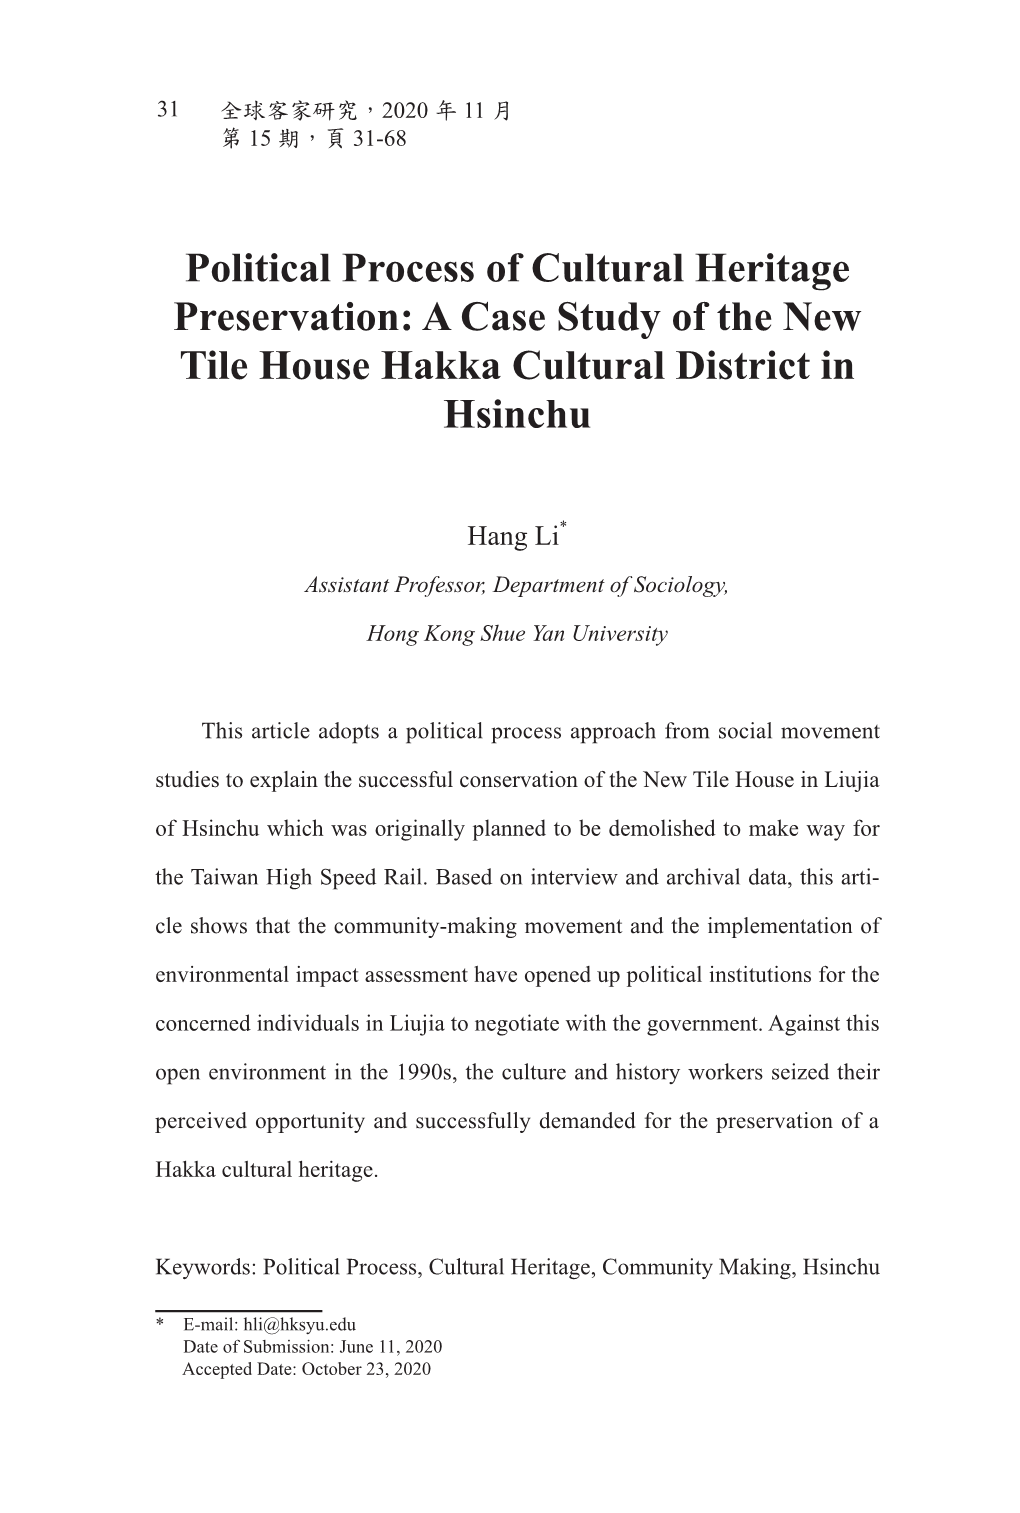 Political Process of Cultural Heritage Preservation: a Case Study of the New Tile House Hakka Cultural District in Hsinchu